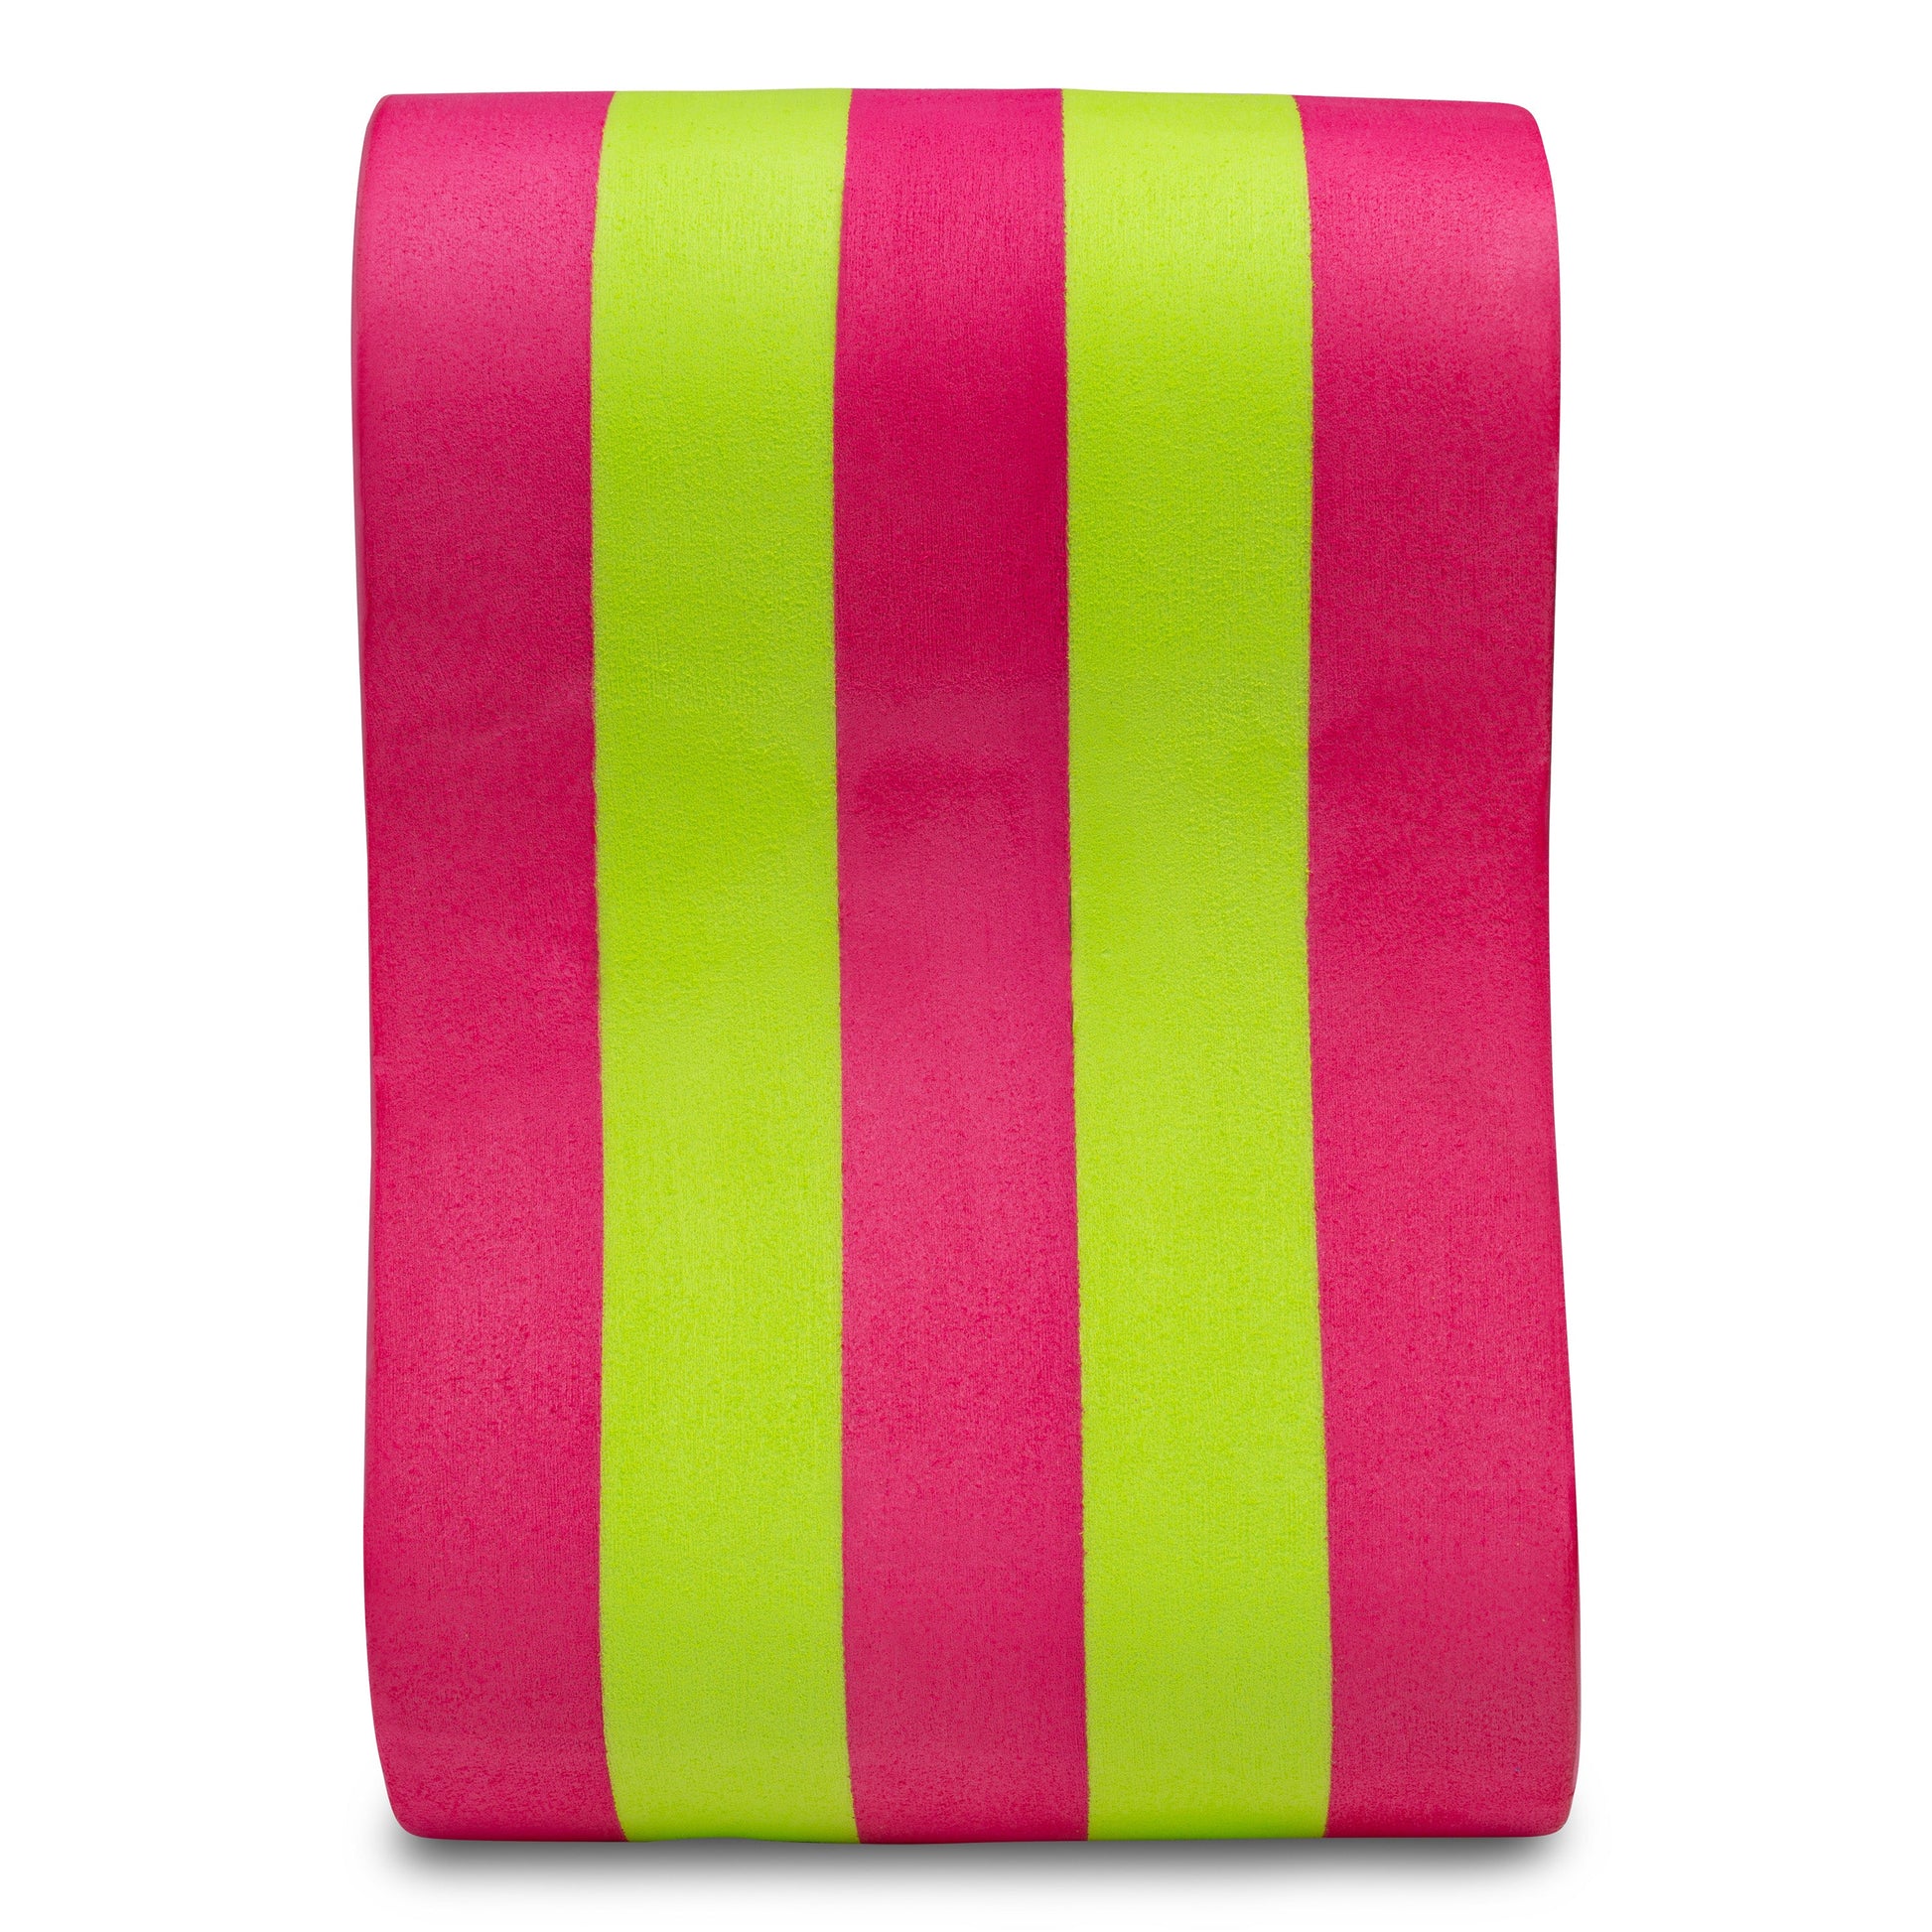 STINGRAY PULL BUOY FOR SWIMMING | GREEN/PINK